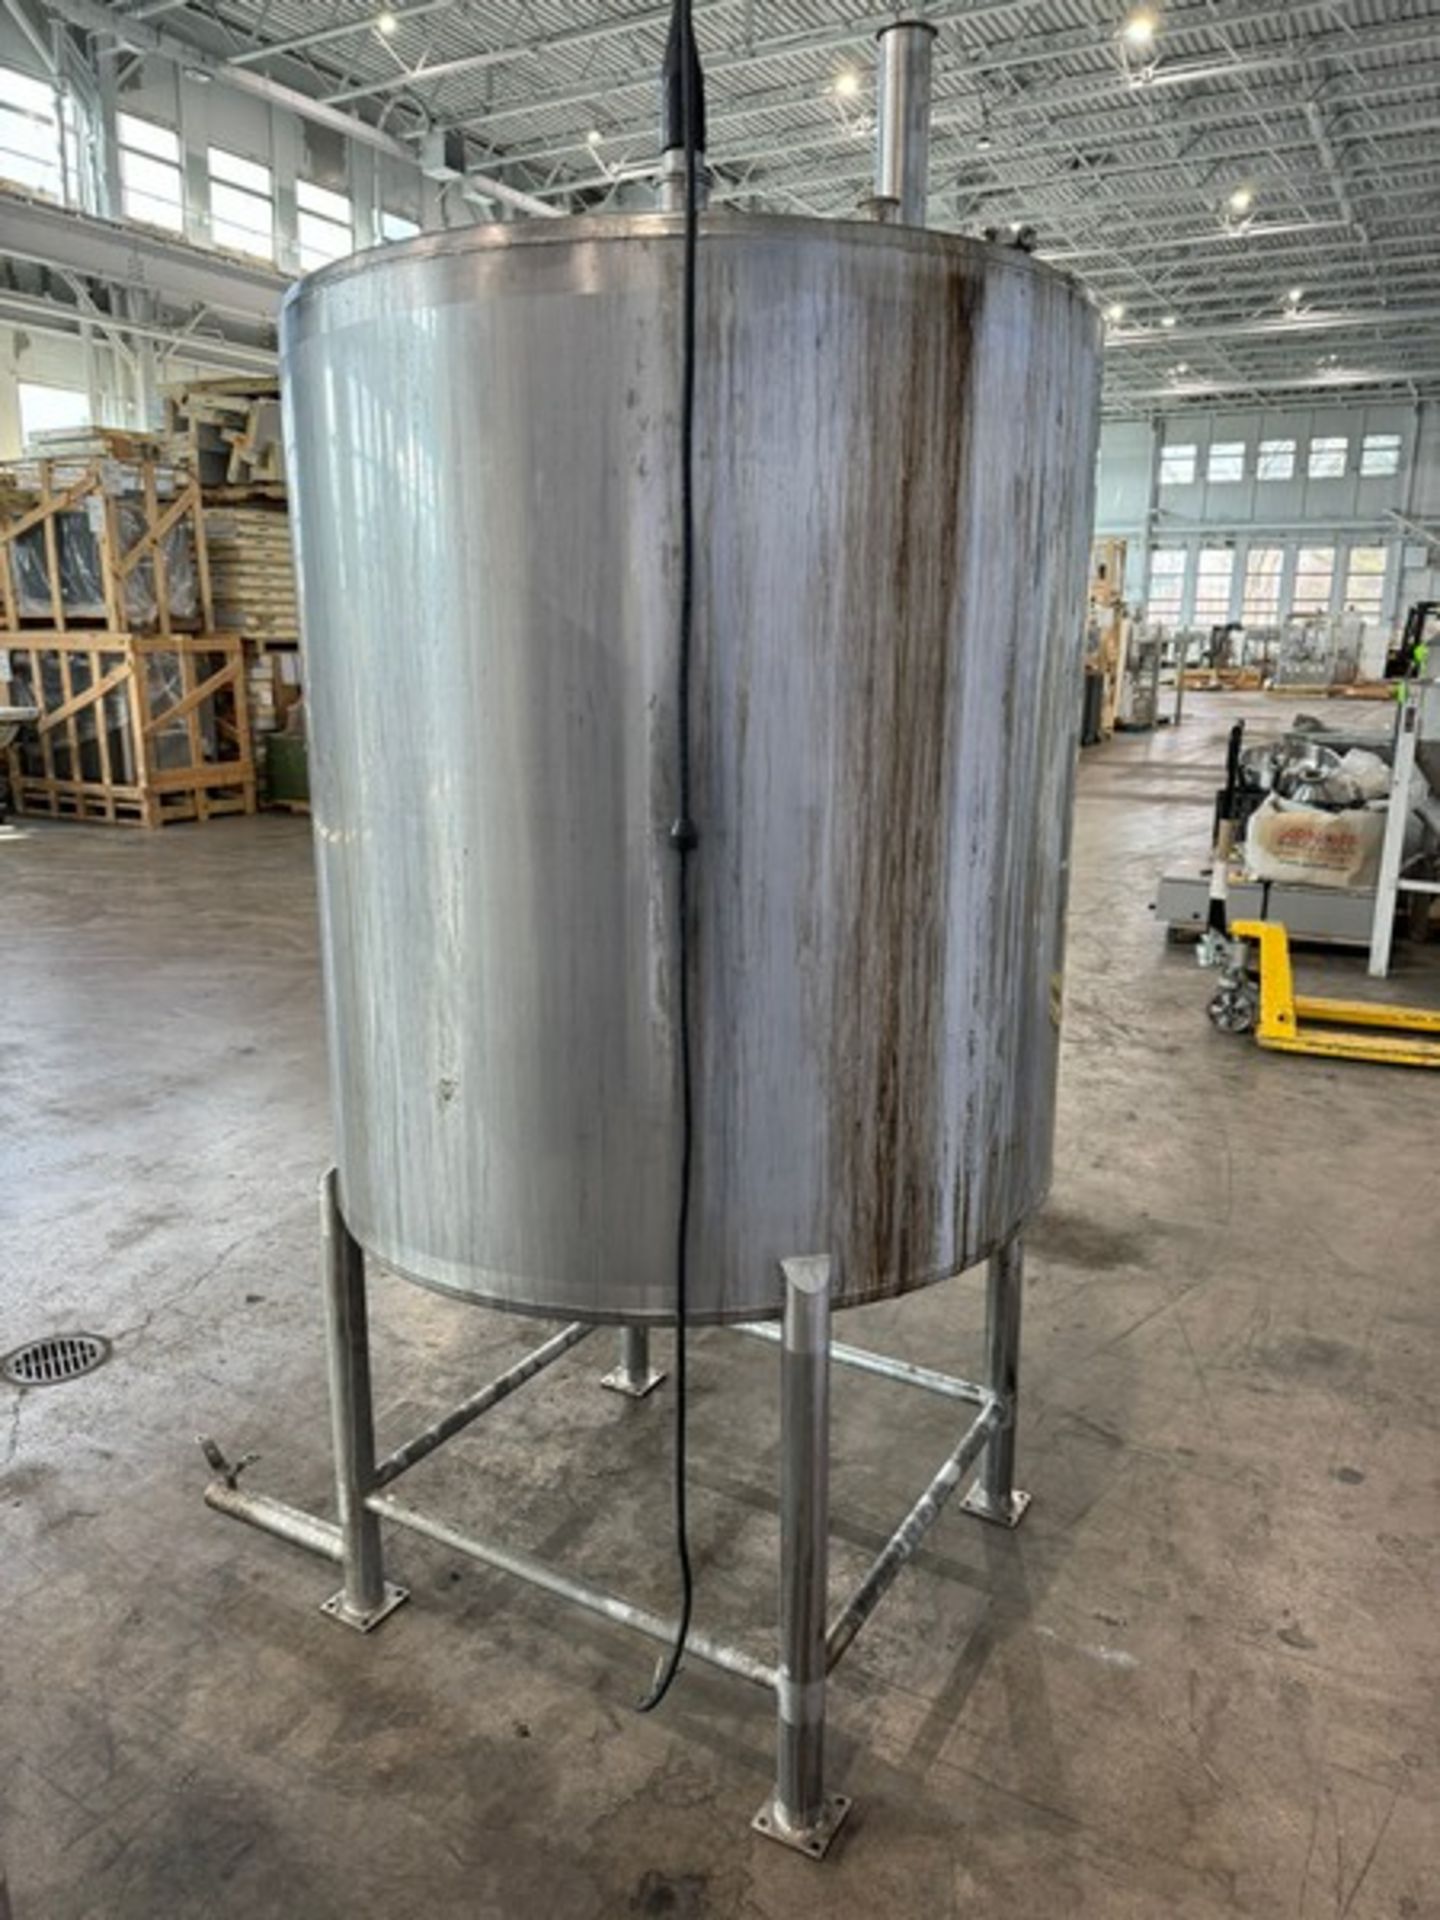 Viatec Aprox. 300 Gal. S/S Single Wall Tank, Vessel Dims.: Aprox. 47" H x 46" Dia. Mounted on S/S - Image 3 of 8